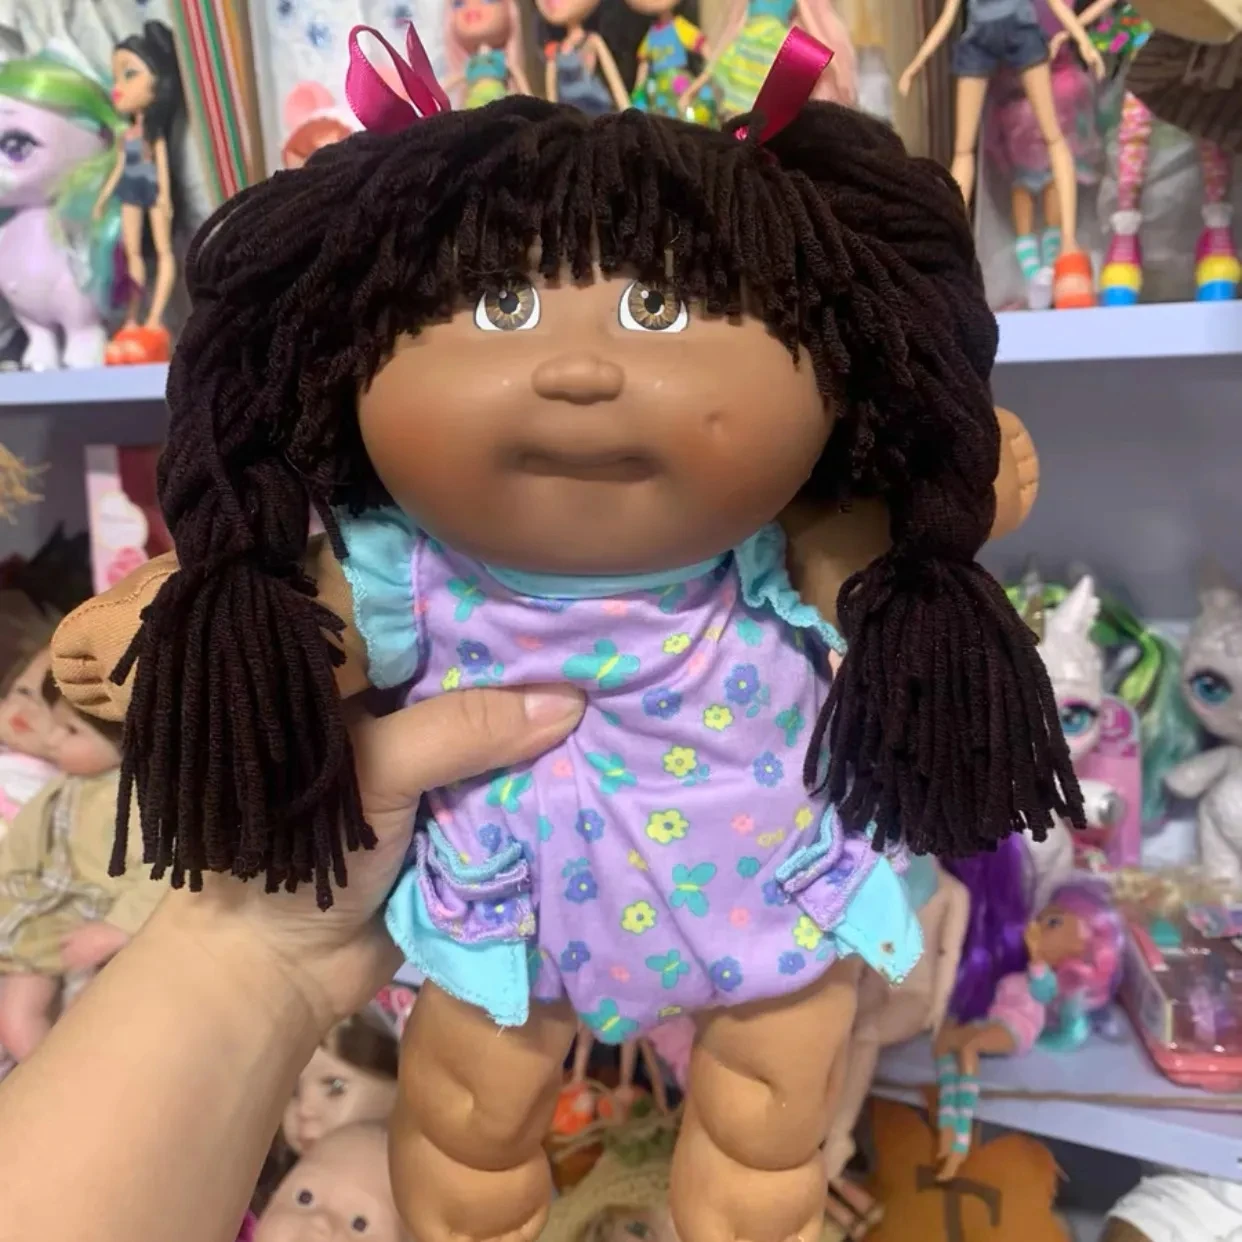 my buddy doll Original Cabbage Patch Kids Babies Doll Playset Collection Cute Children's Toys Girl Collectible Gifts Vintage Limited Edition living dead dolls Dolls